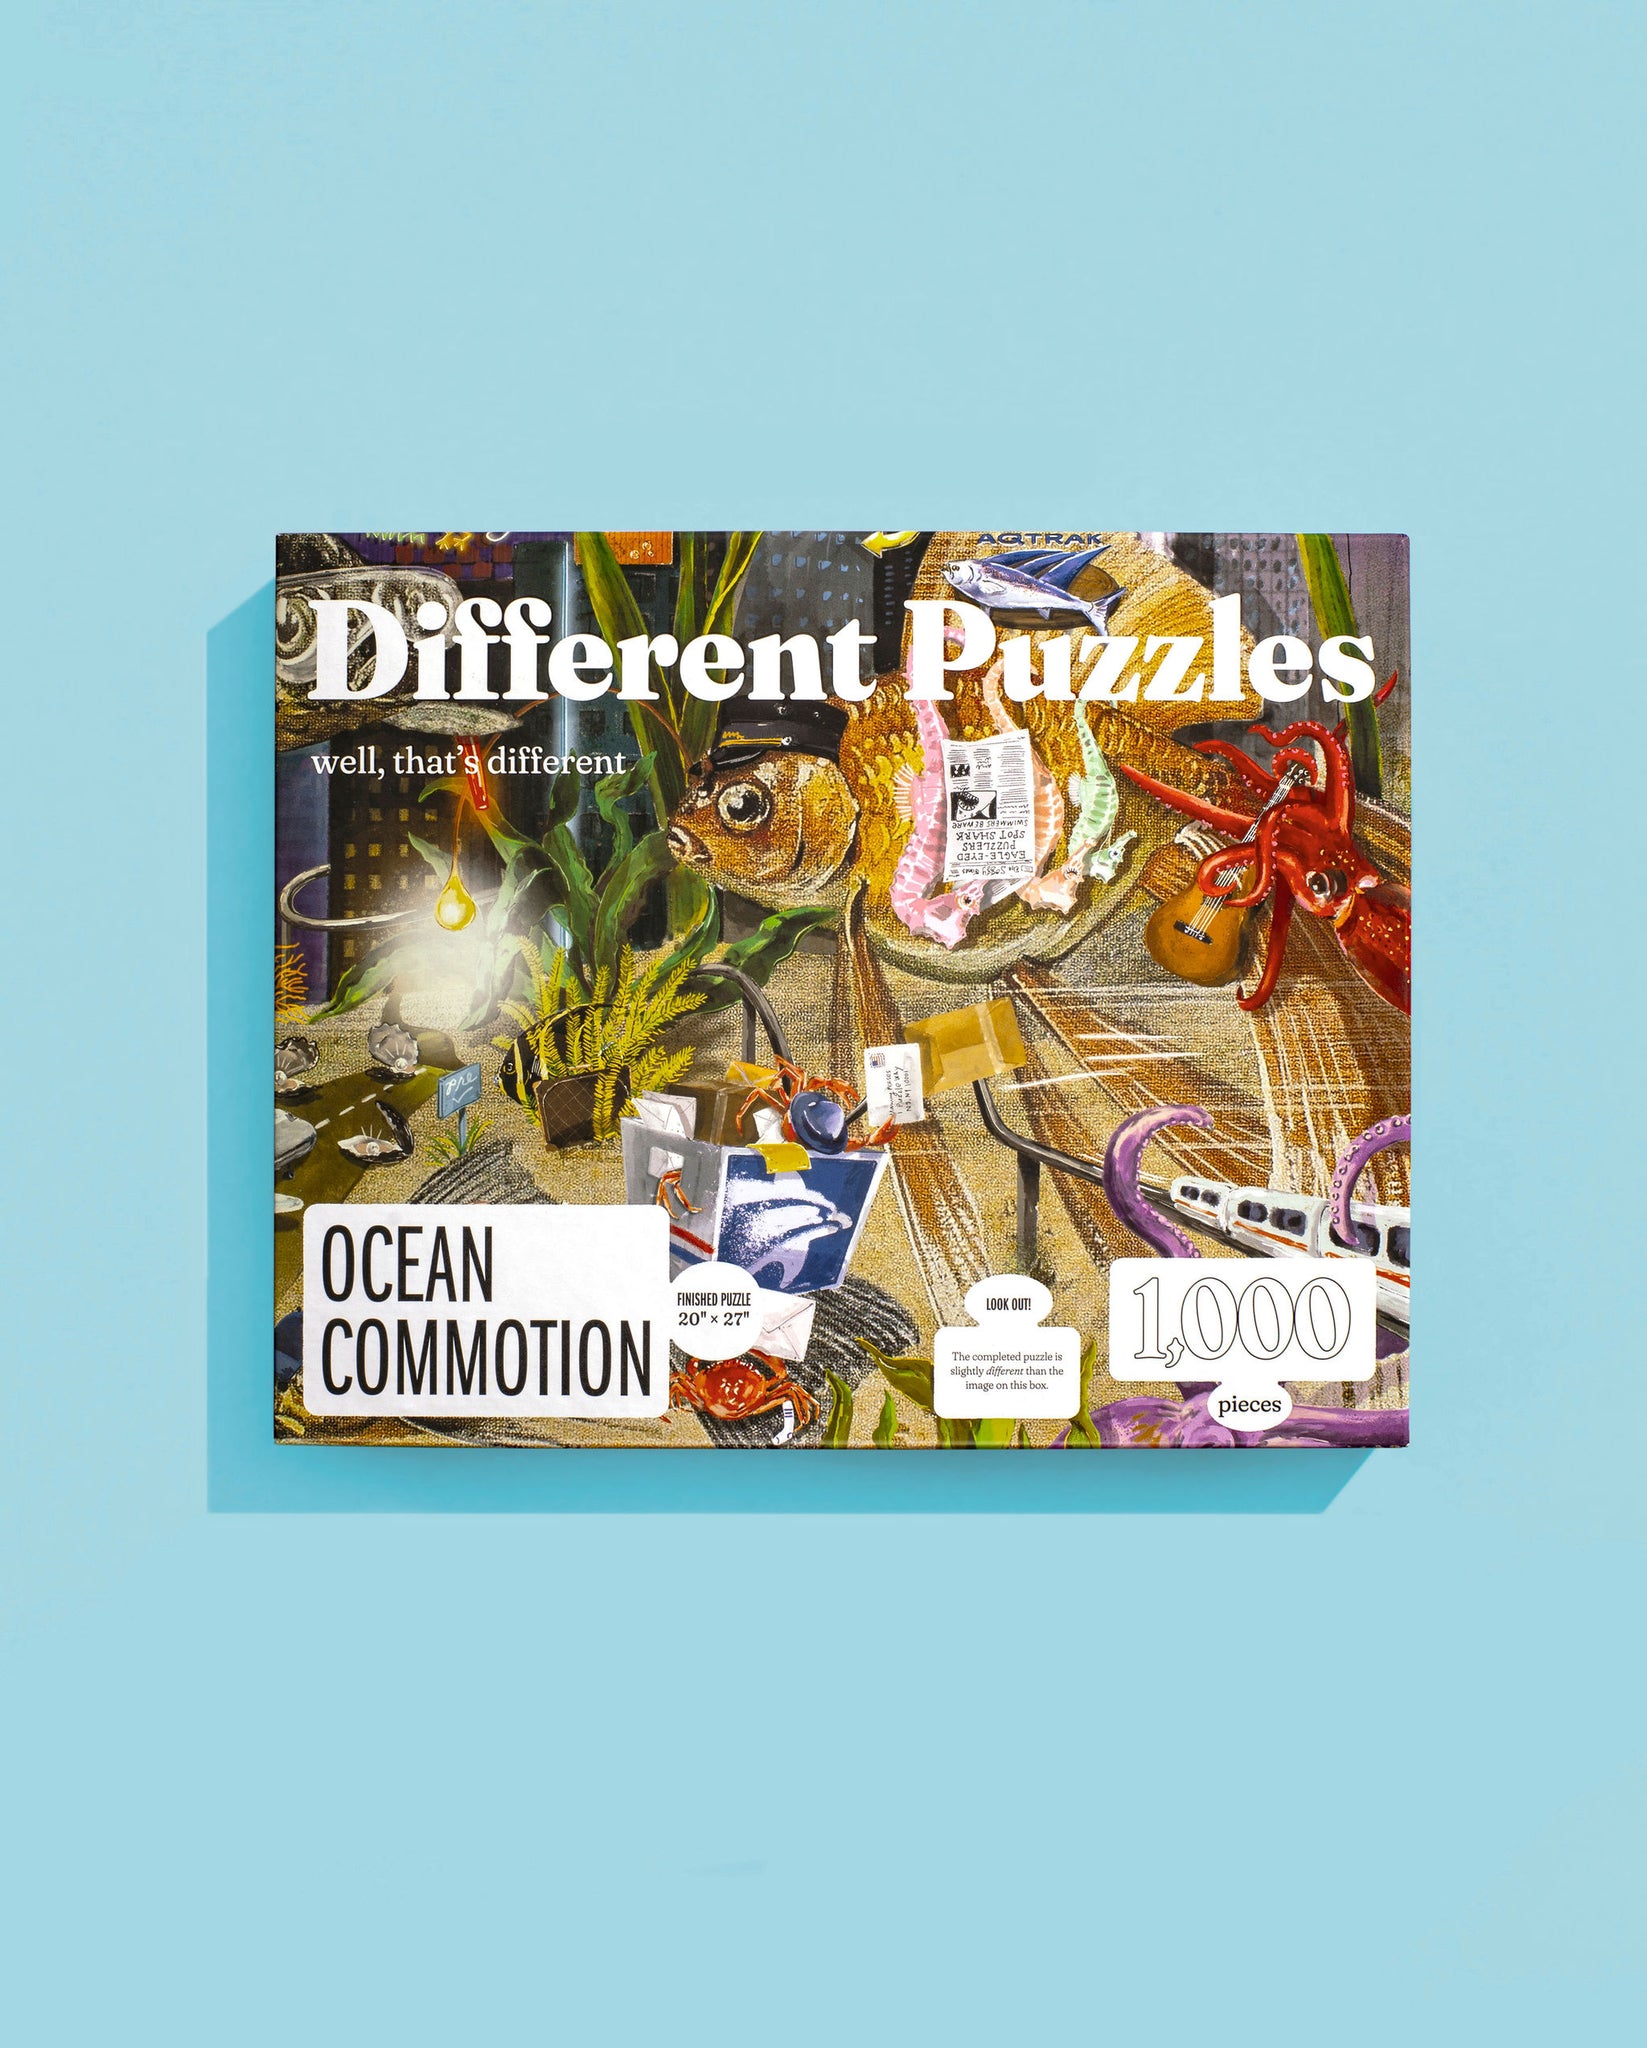 Ocean Commotion – 1,000 pieces